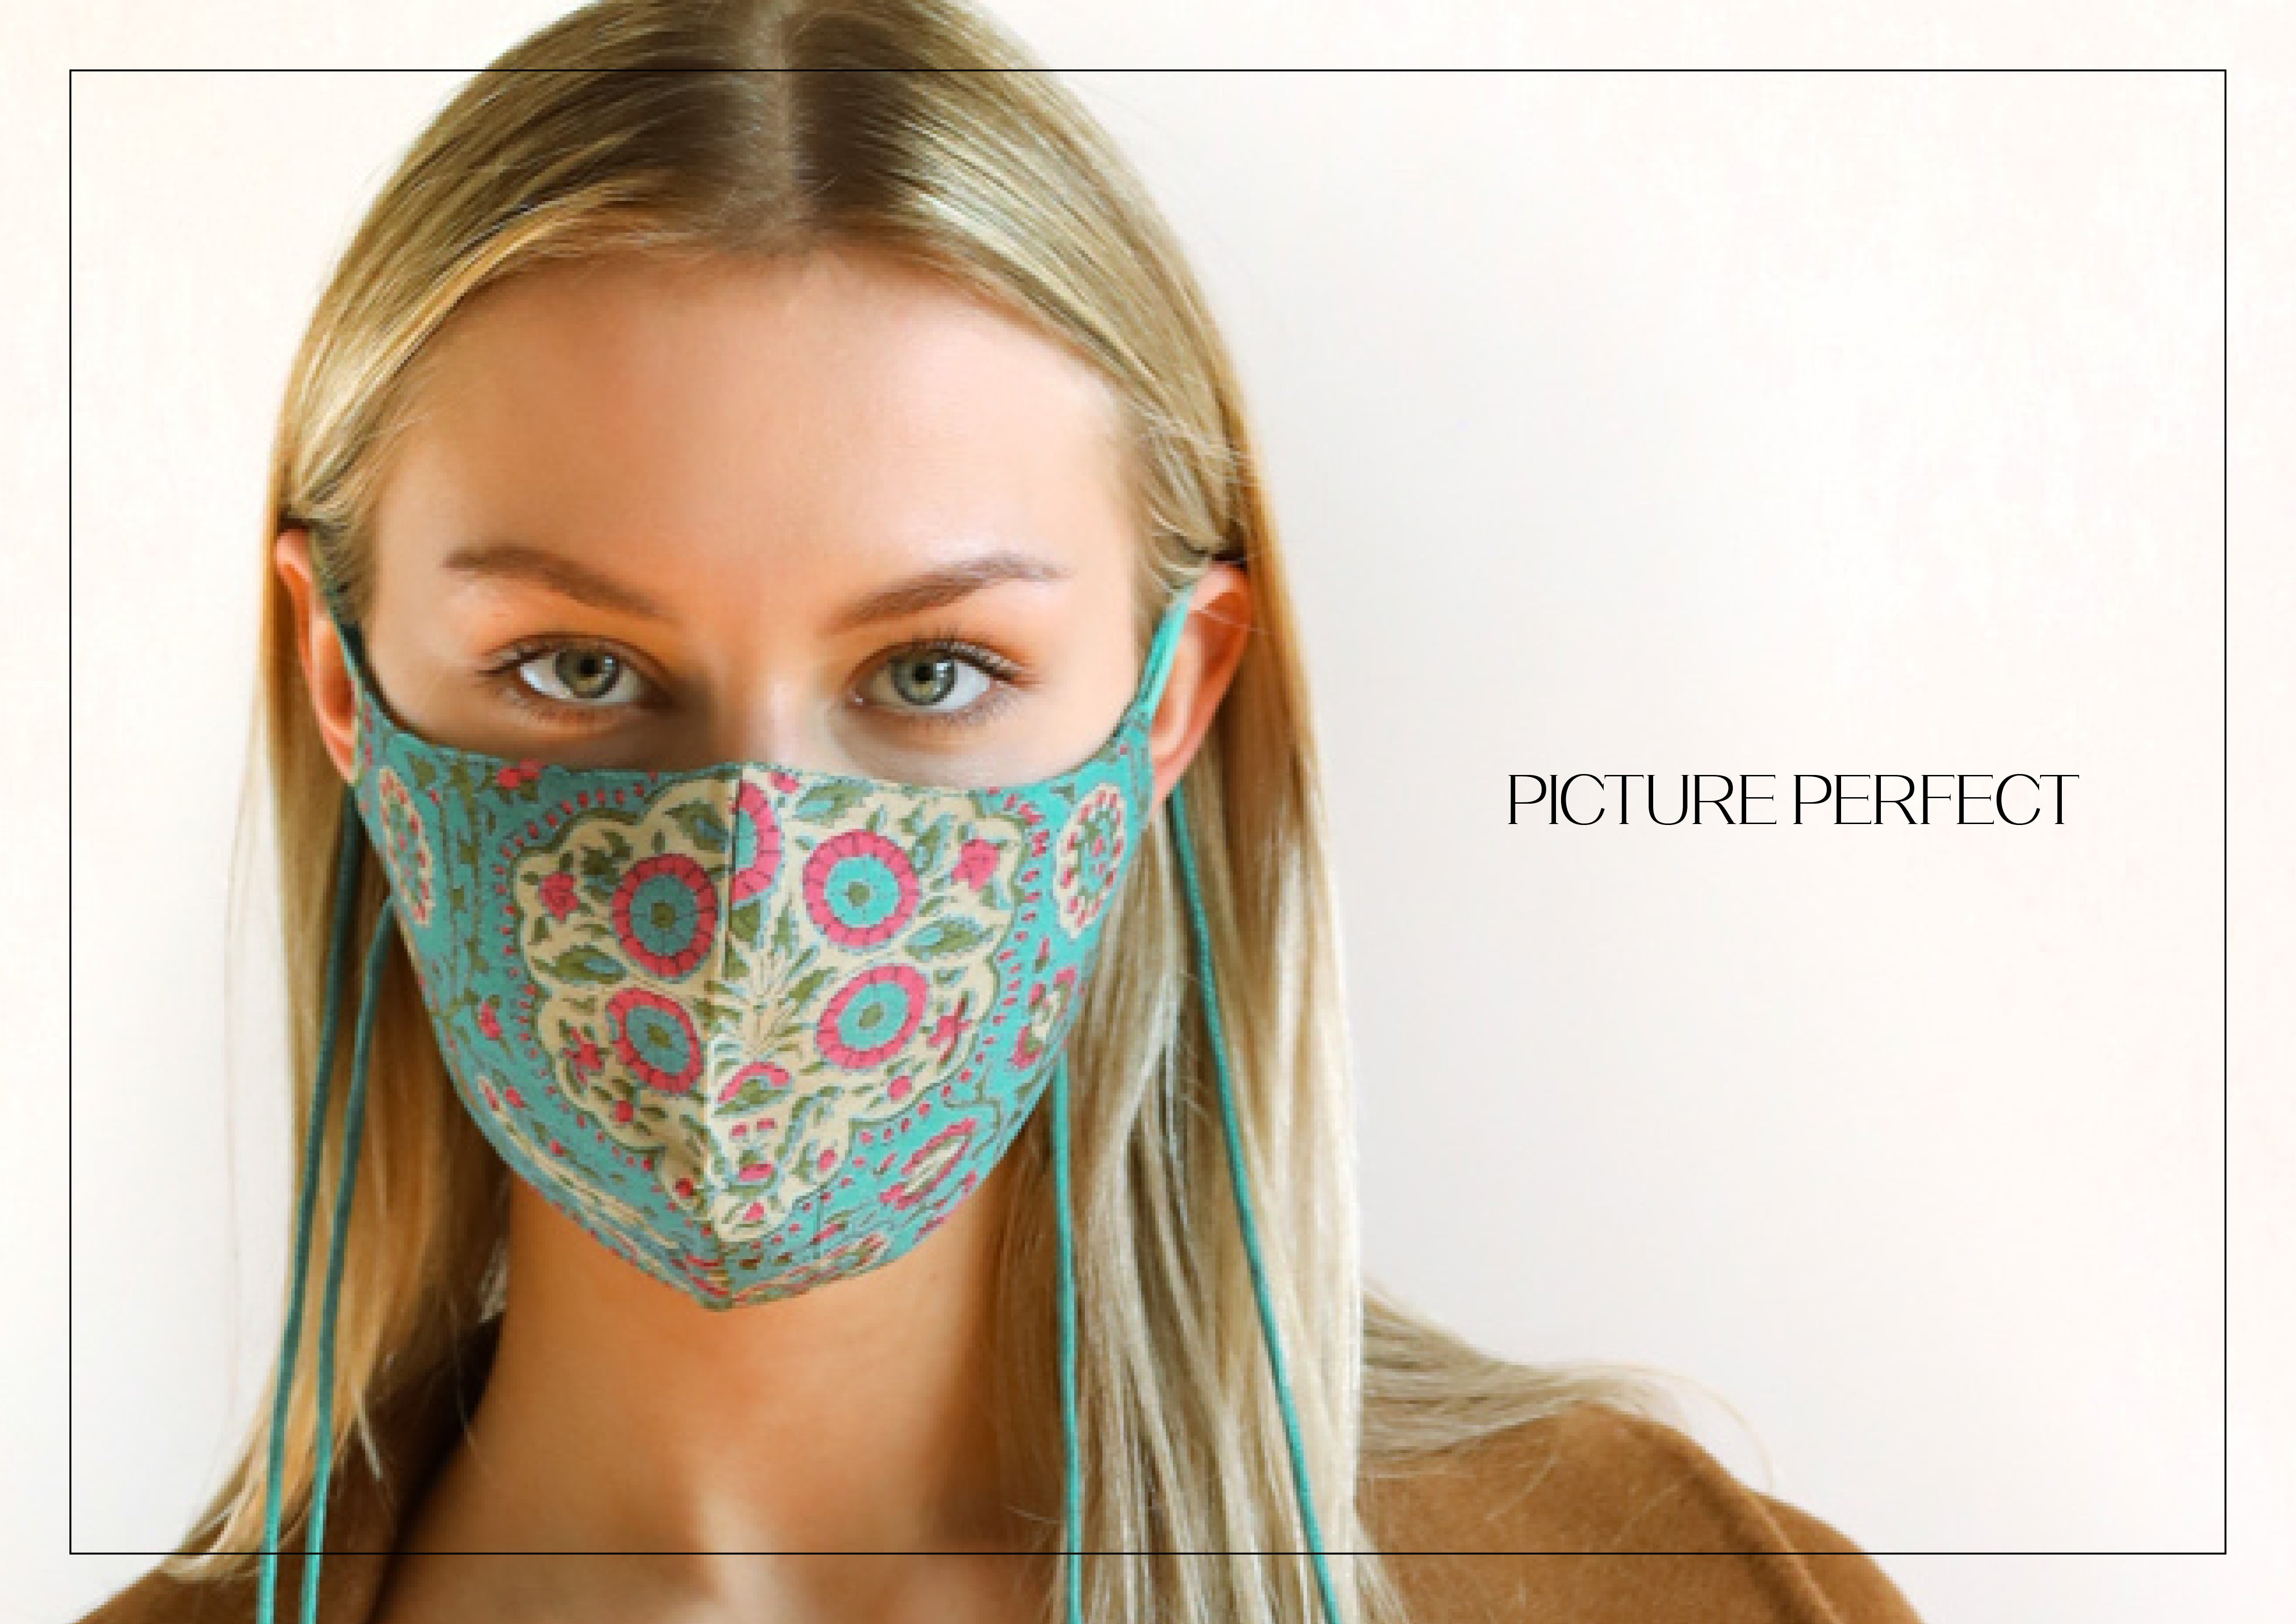 Handcrafted Fashionable Reversible Face Mask/Covering by Namaskaya